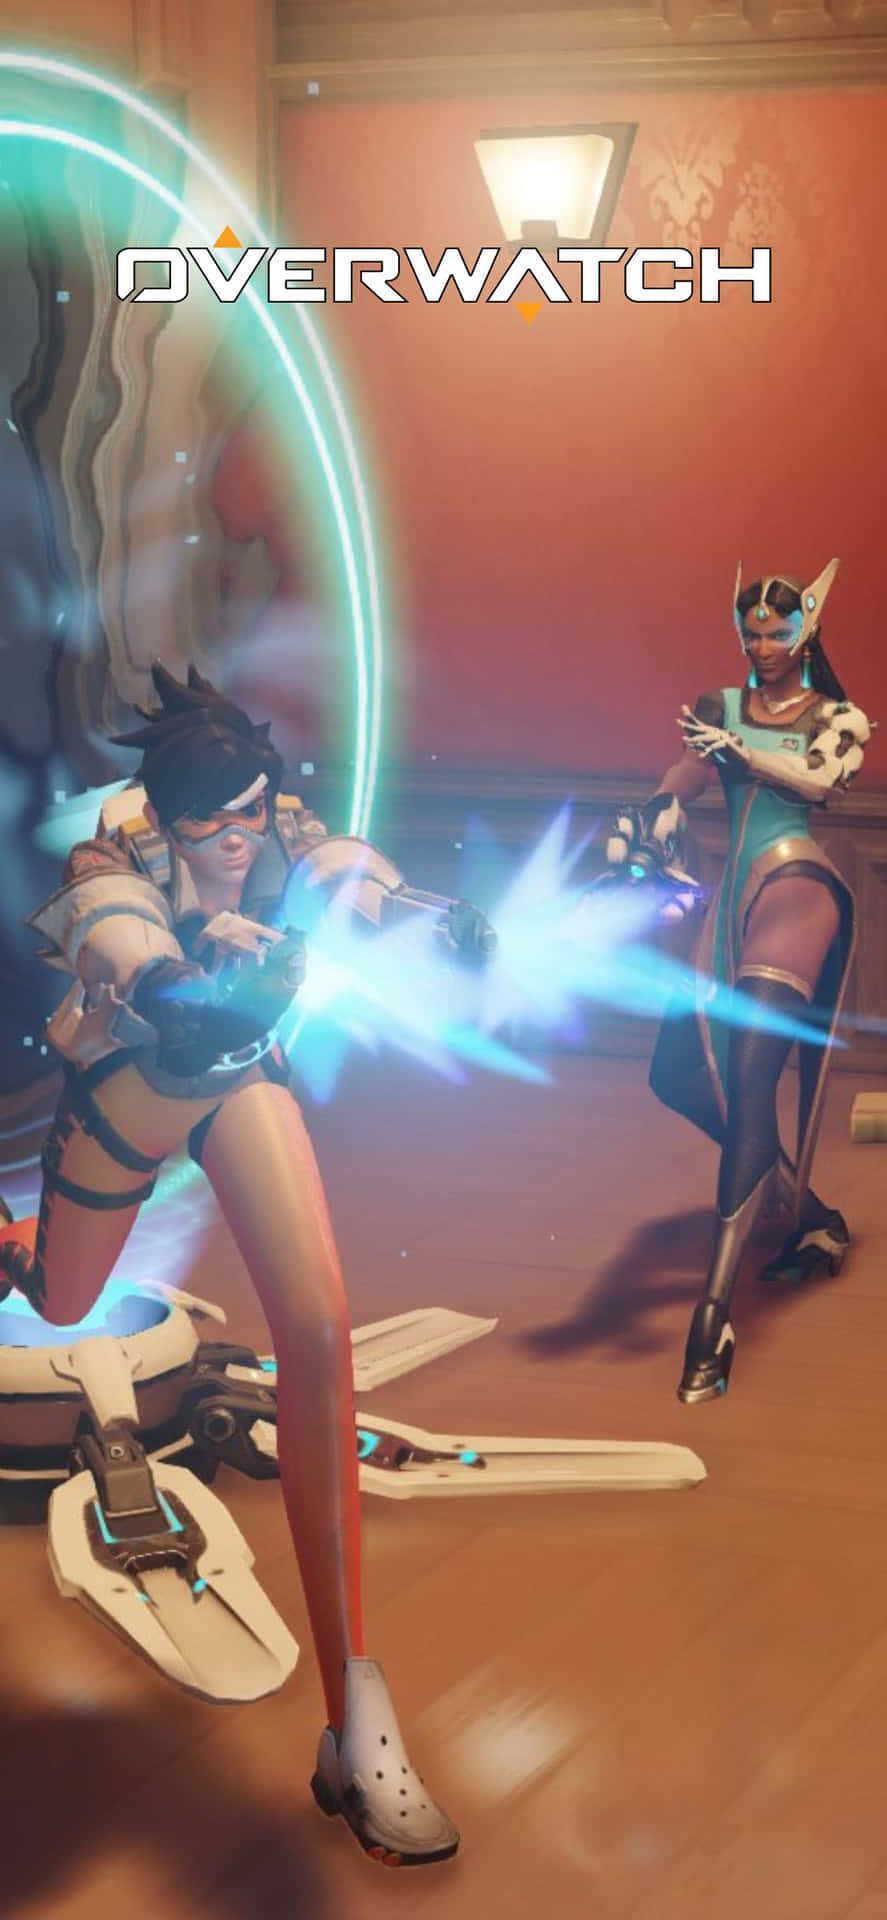 Get ready to jump into the action with your Iphone X and Overwatch